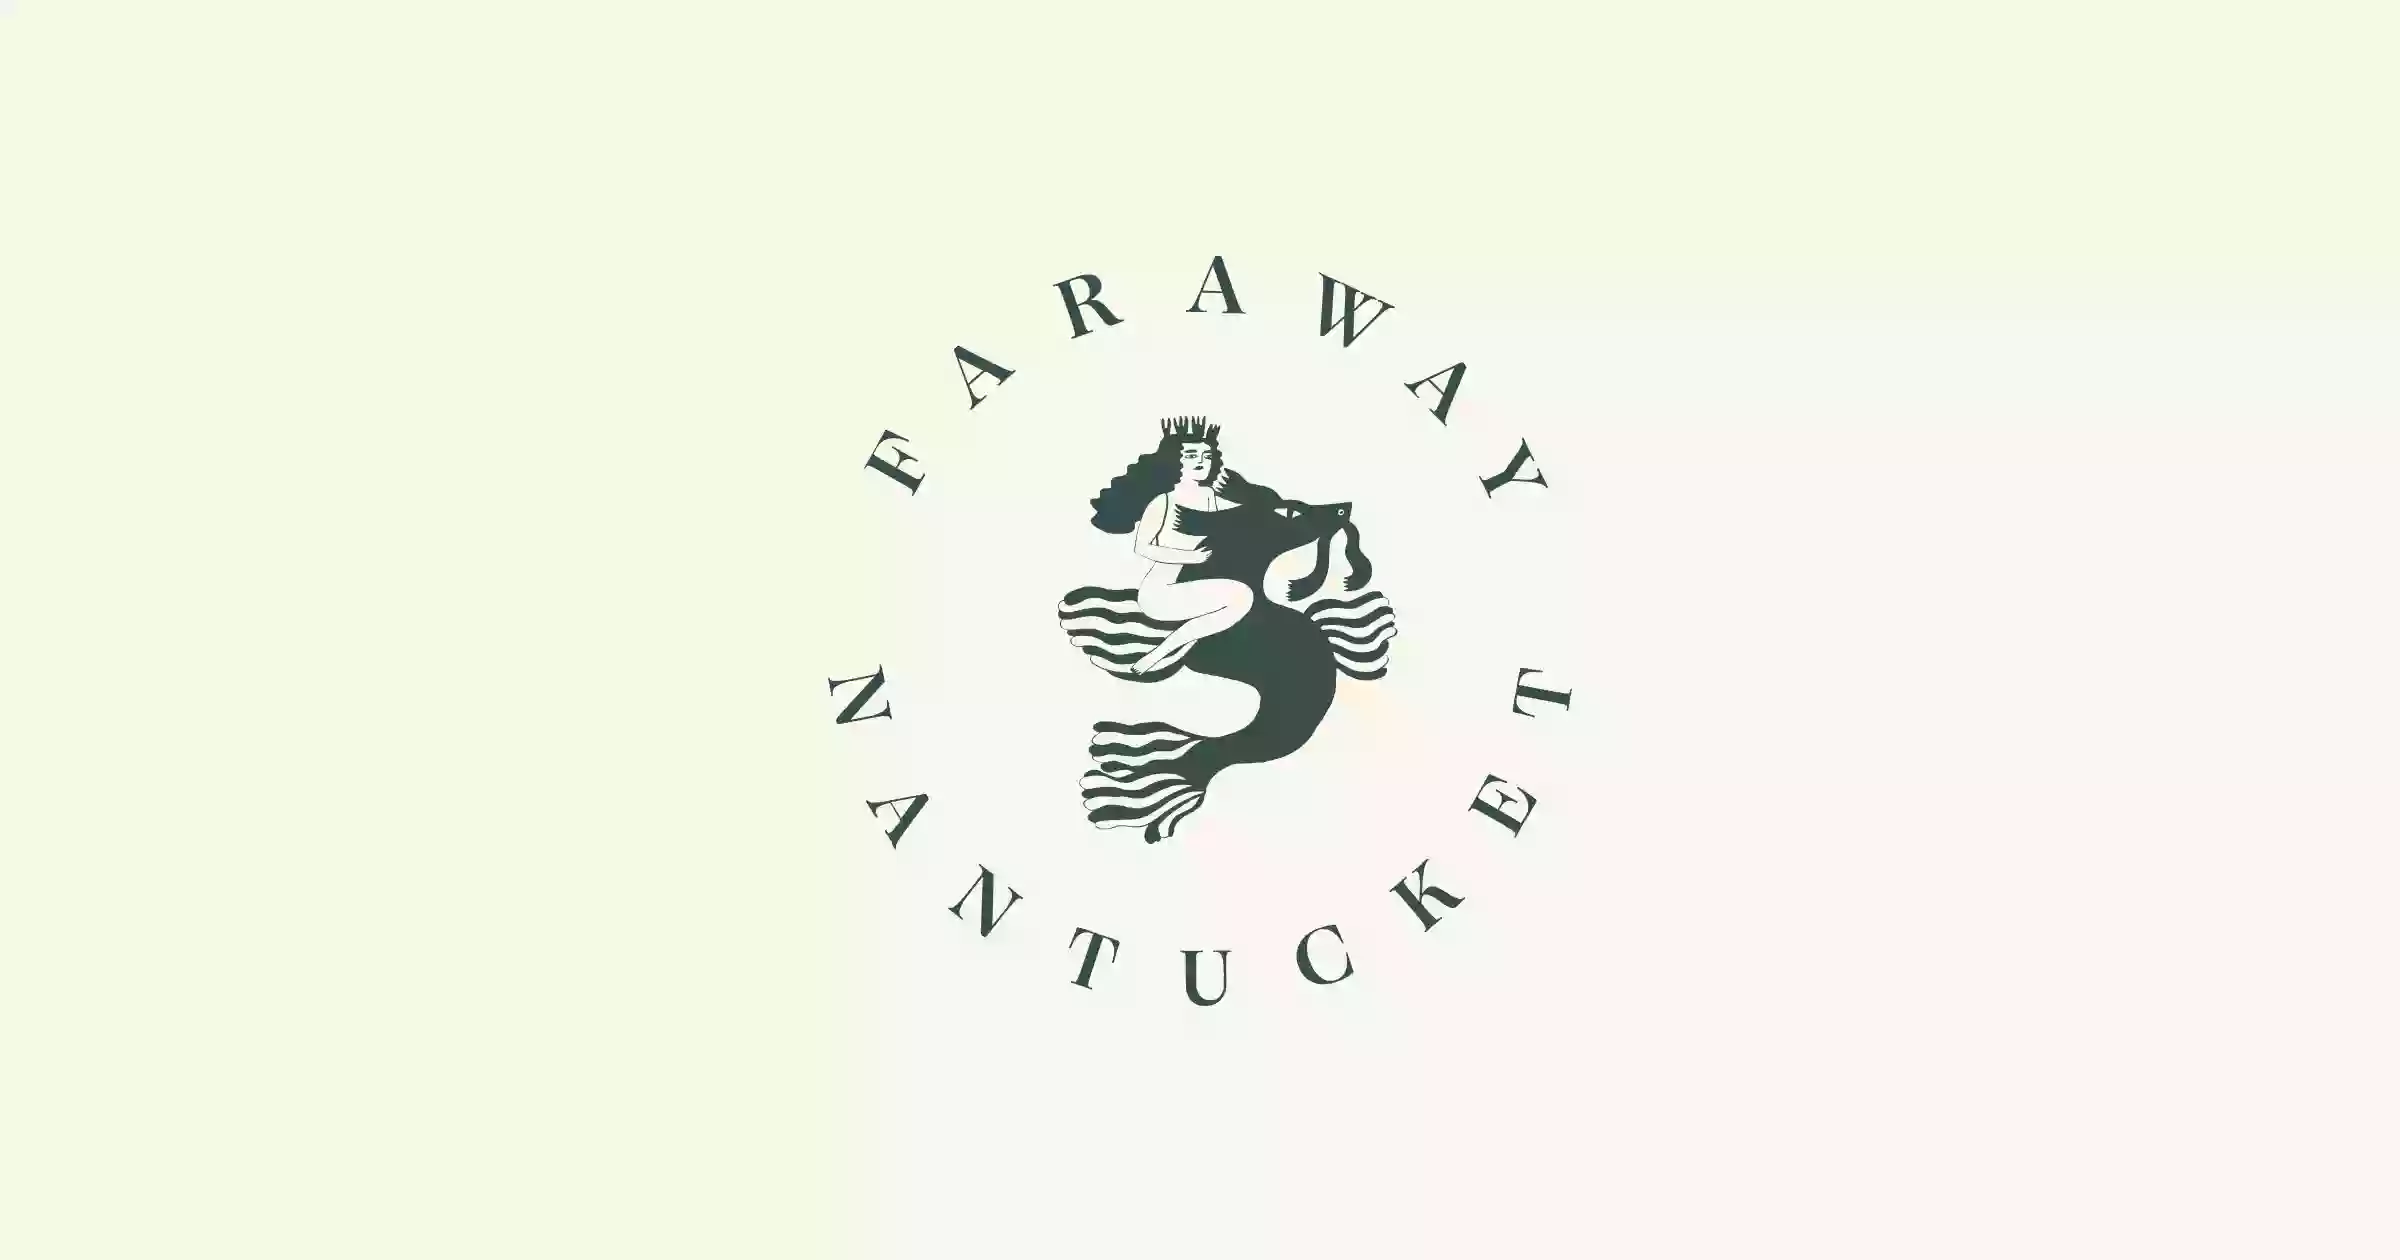 Faraway Cafe by the STRAND